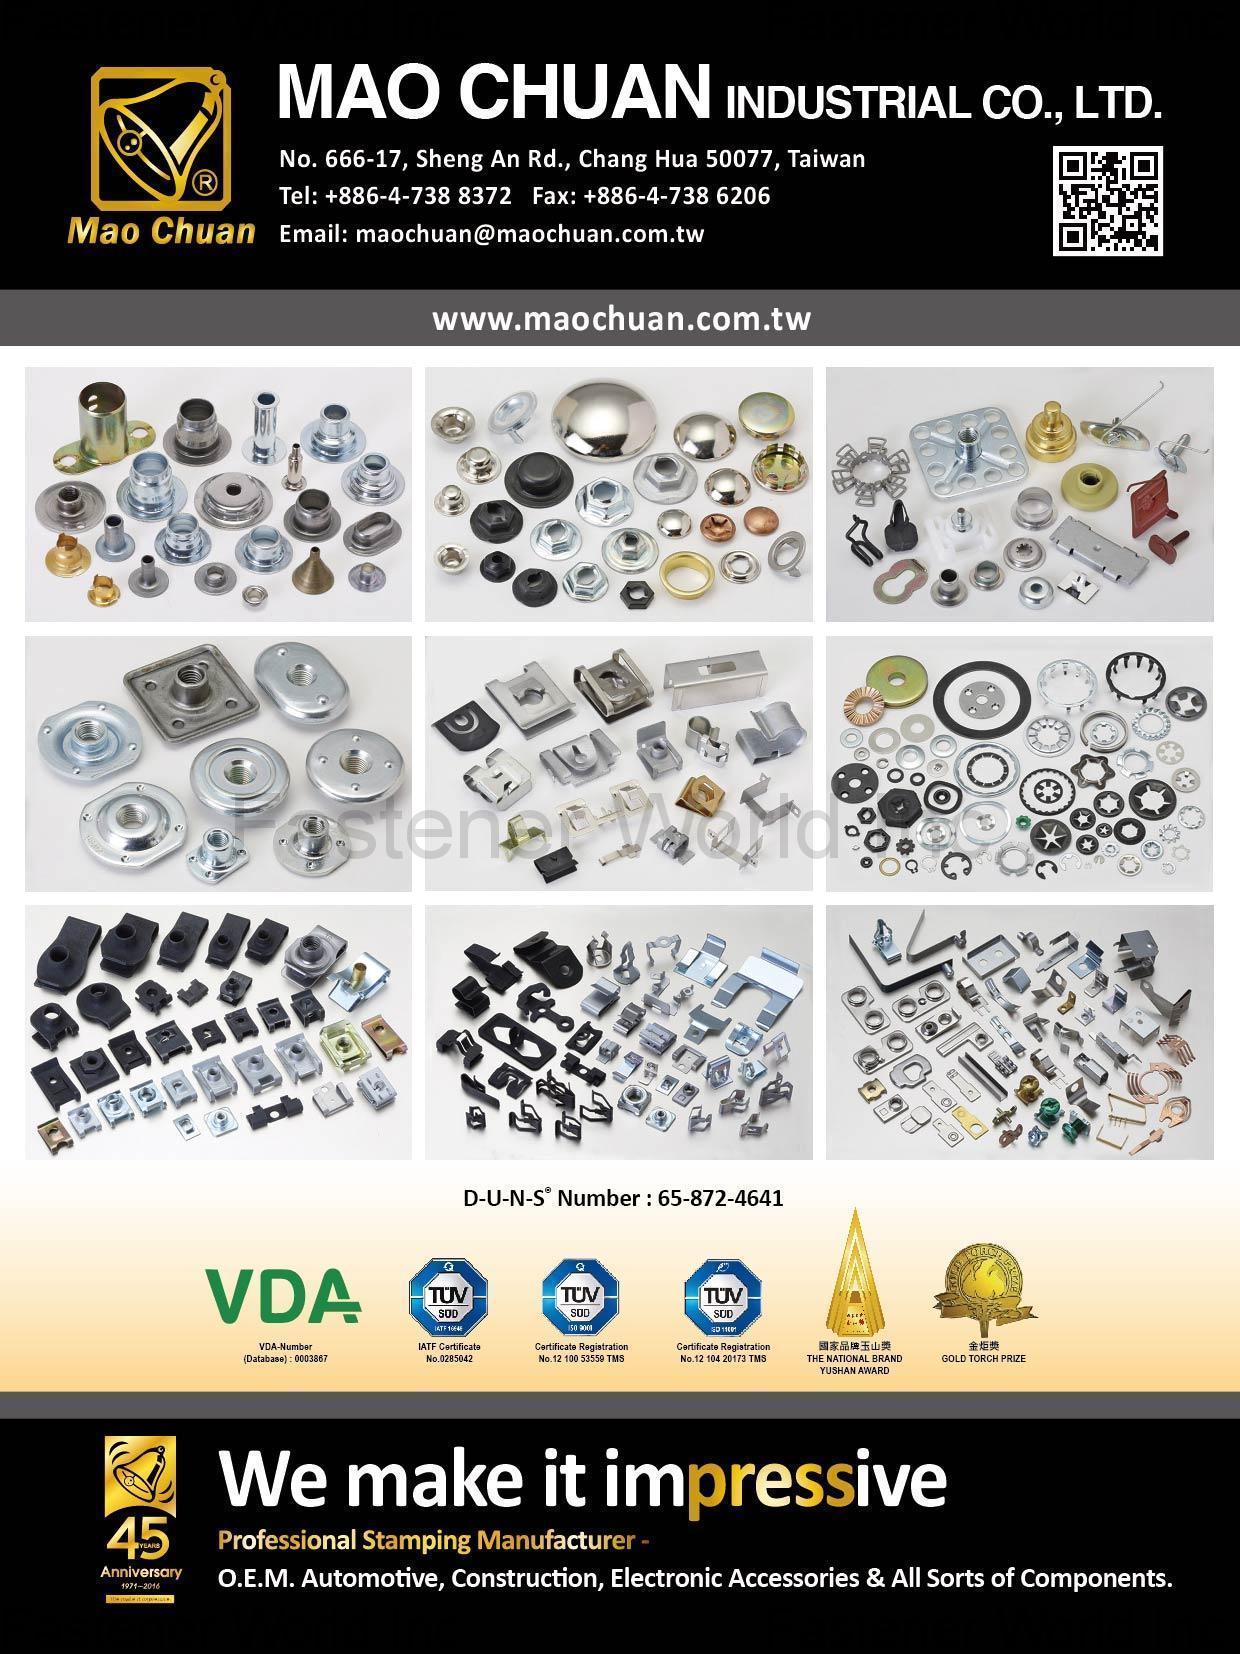 MAO CHUAN INDUSTRIAL CO., LTD. , Stamping (O.E.M, Electronic Accessories, Automotive, Customized Components, Construction) , Stamped Parts